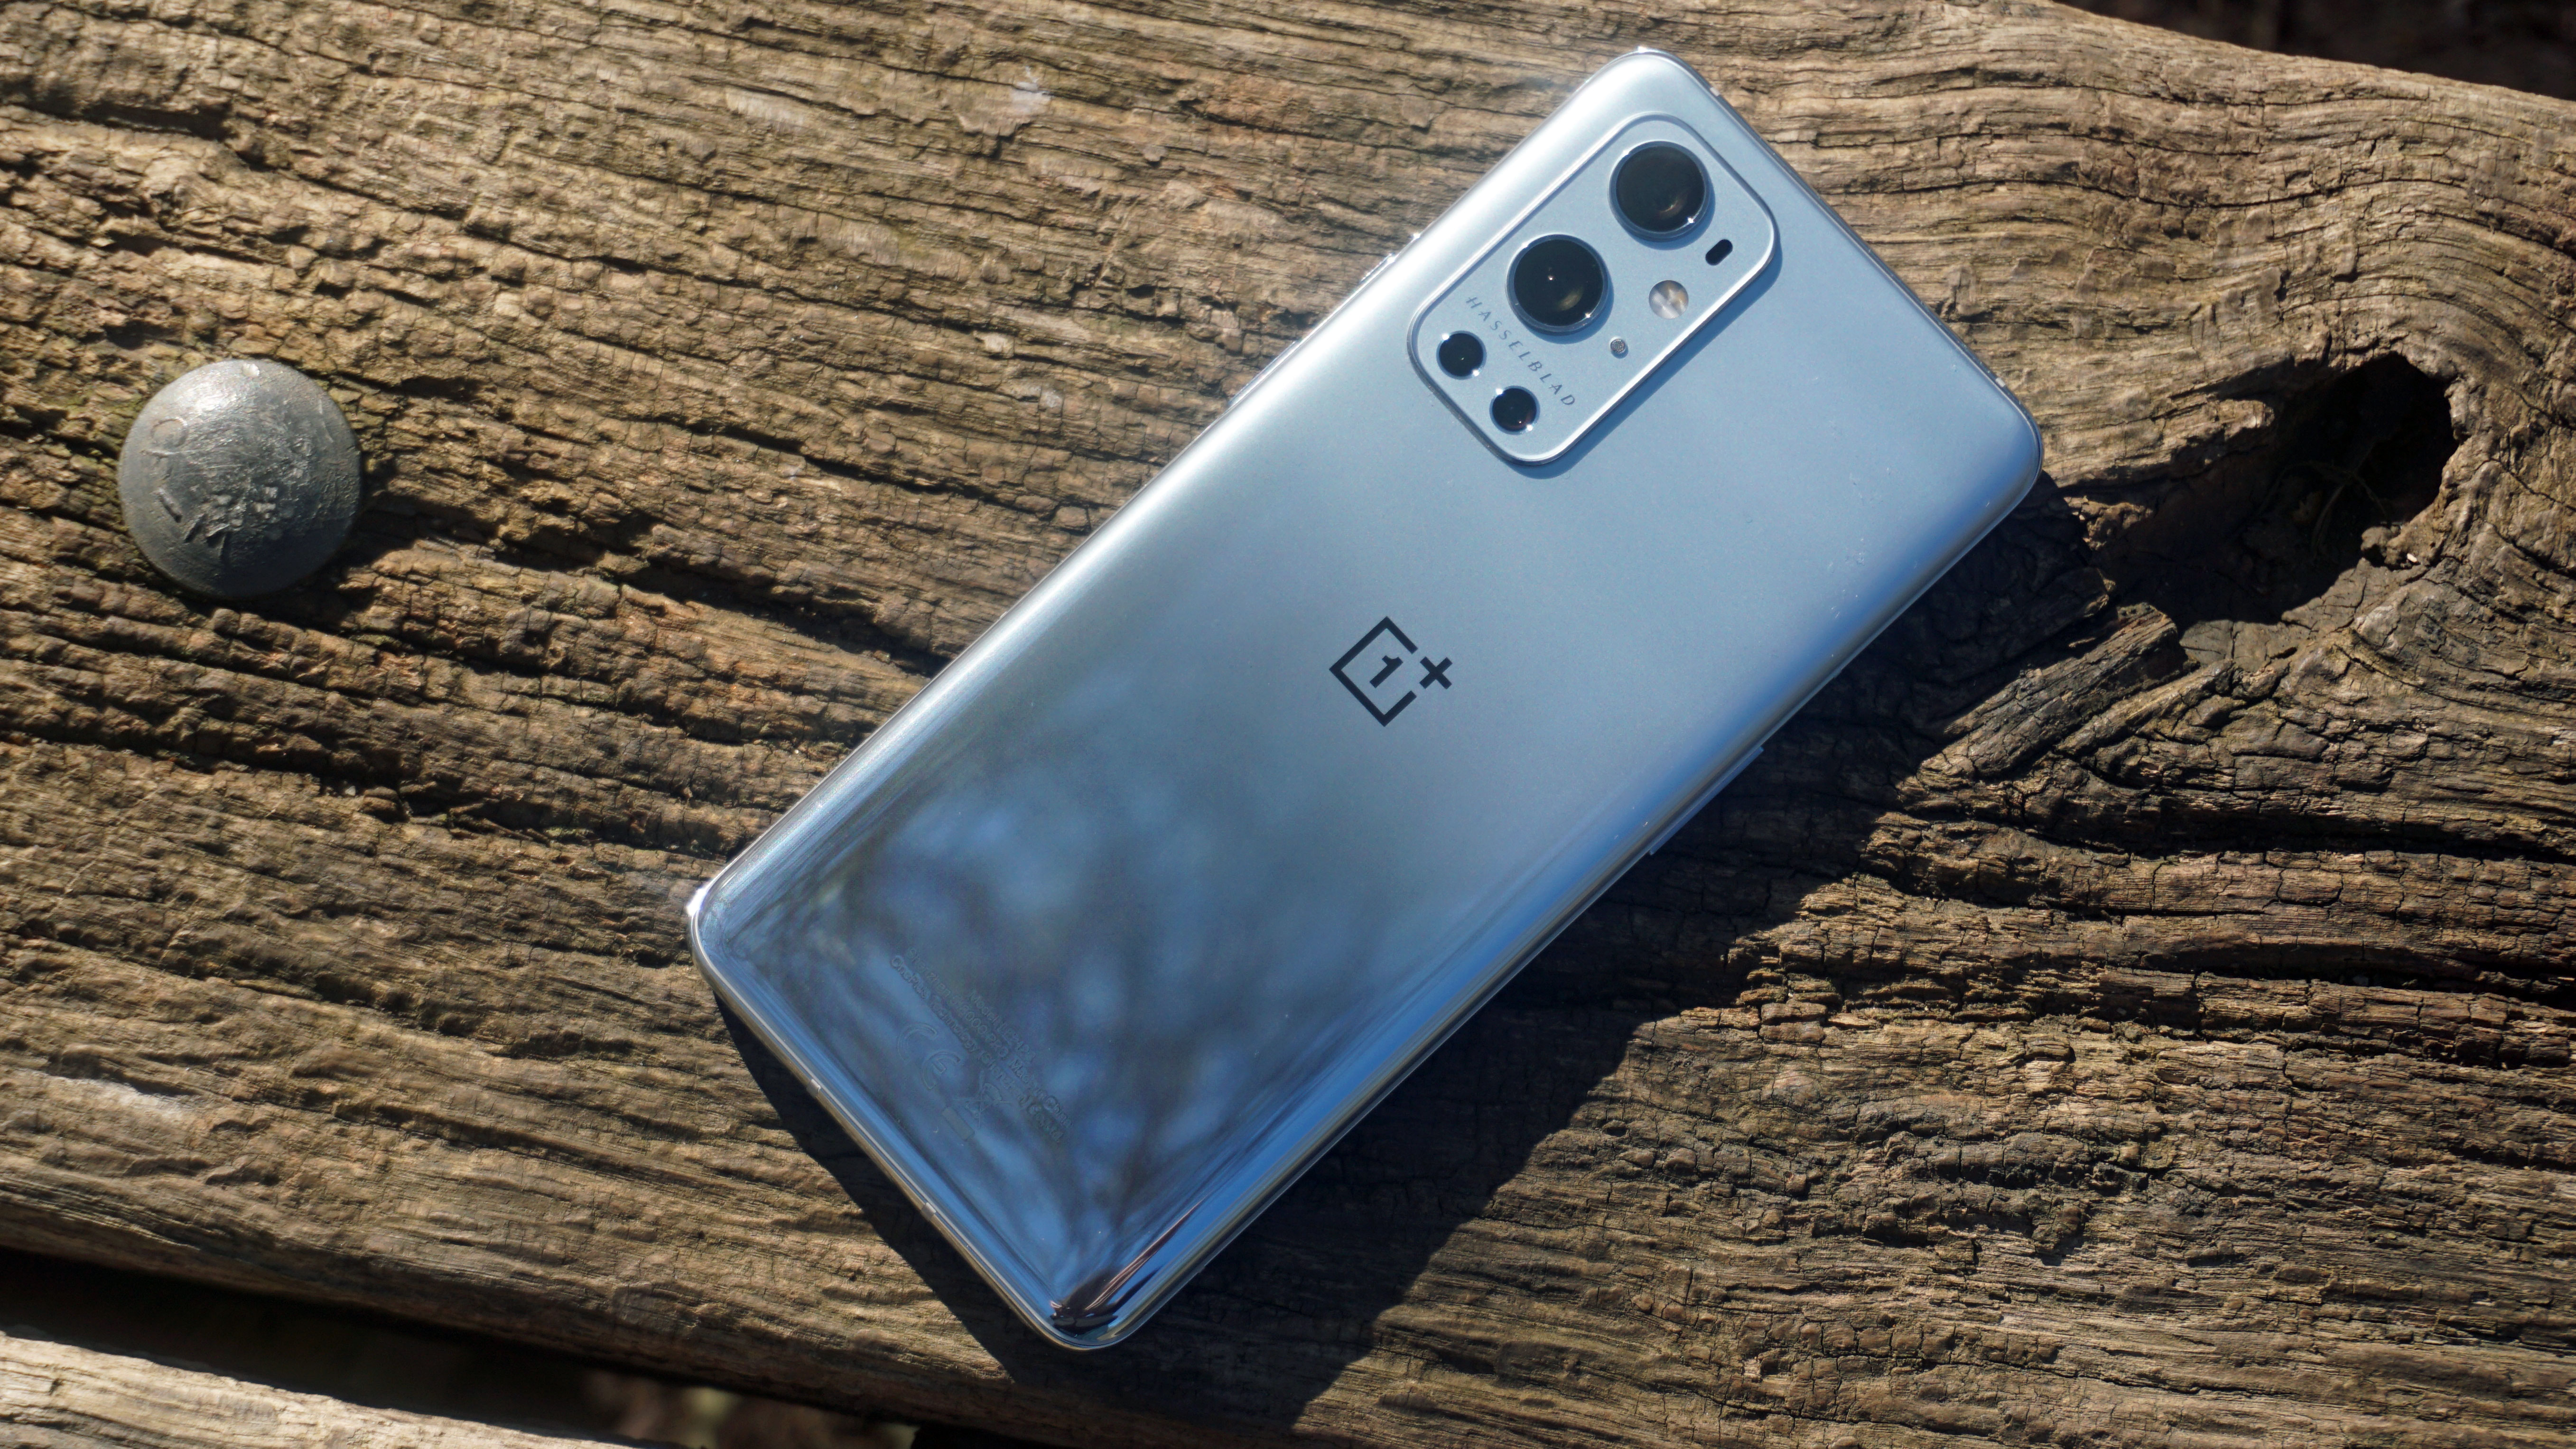 A OnePlus 9 Pro from the back, laying on a wooden surface